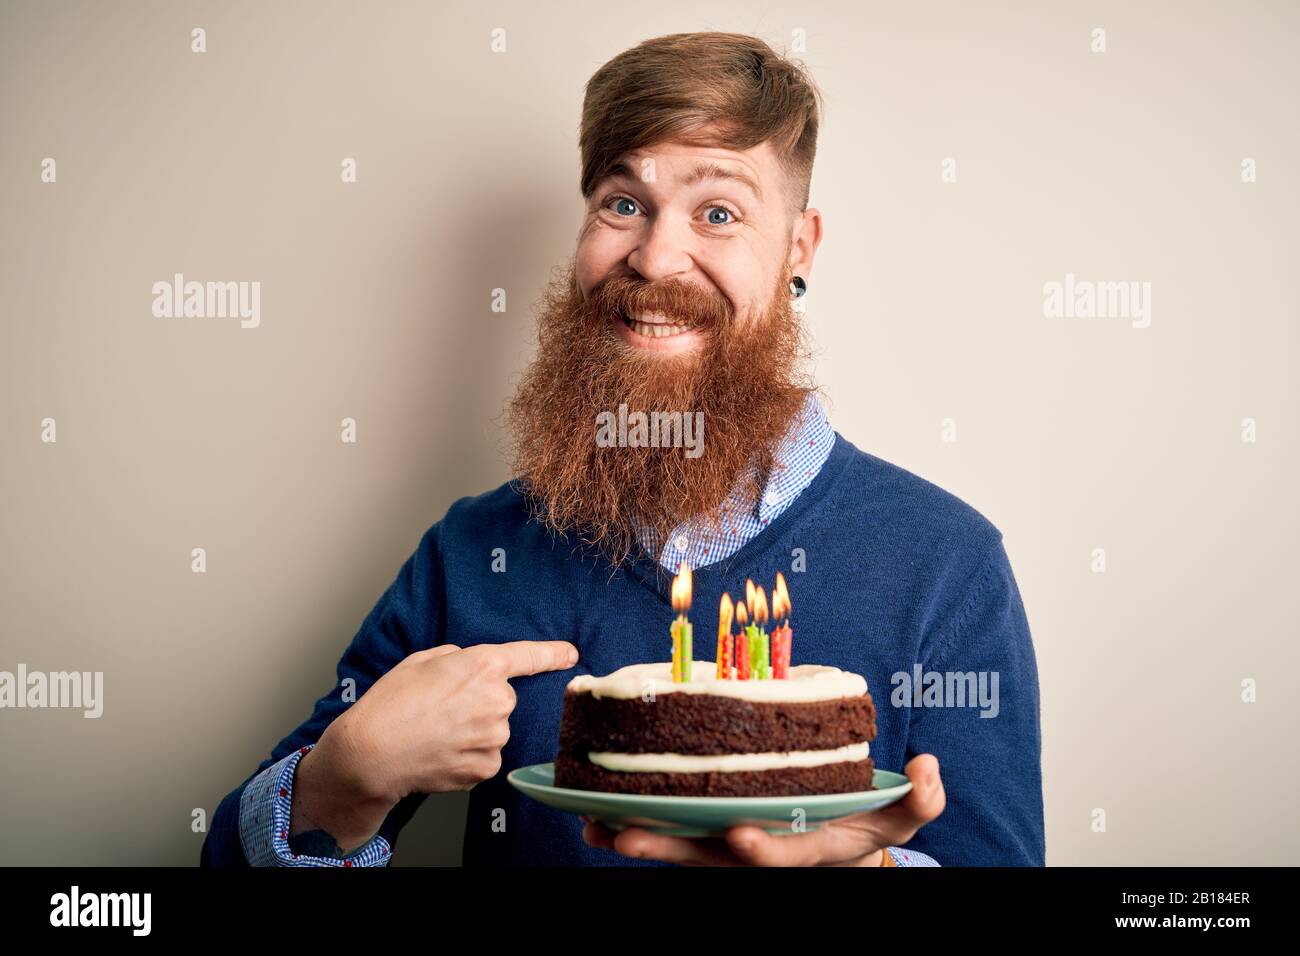 Handsome Man with Beard Holding Cake Slices Smiling Happy Pointing with  Hand and Finger To the Side Stock Photo - Image of gesture, beard: 212535228